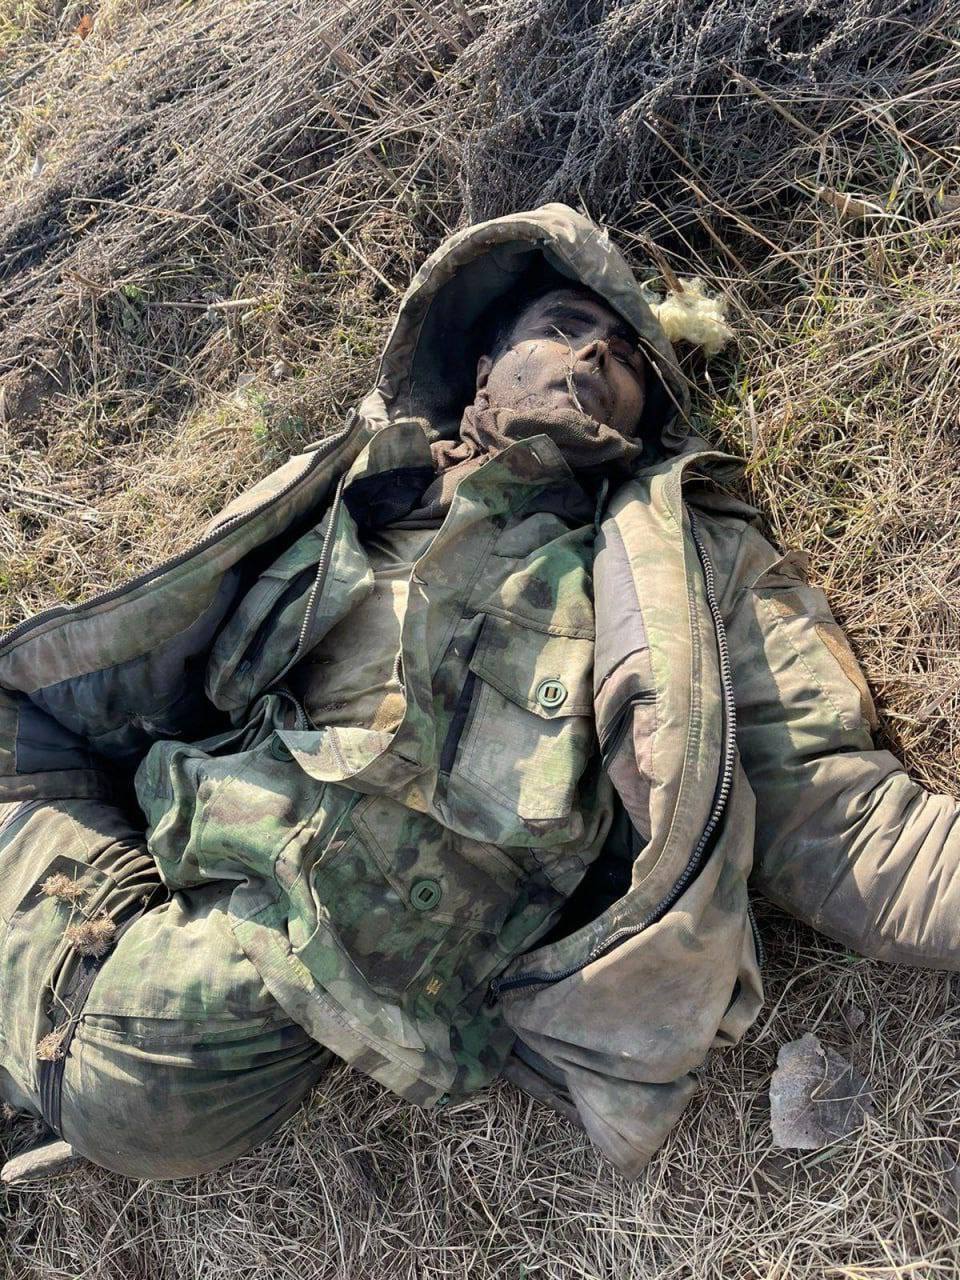 The corpse of a Russian soldier in an unnatural pose